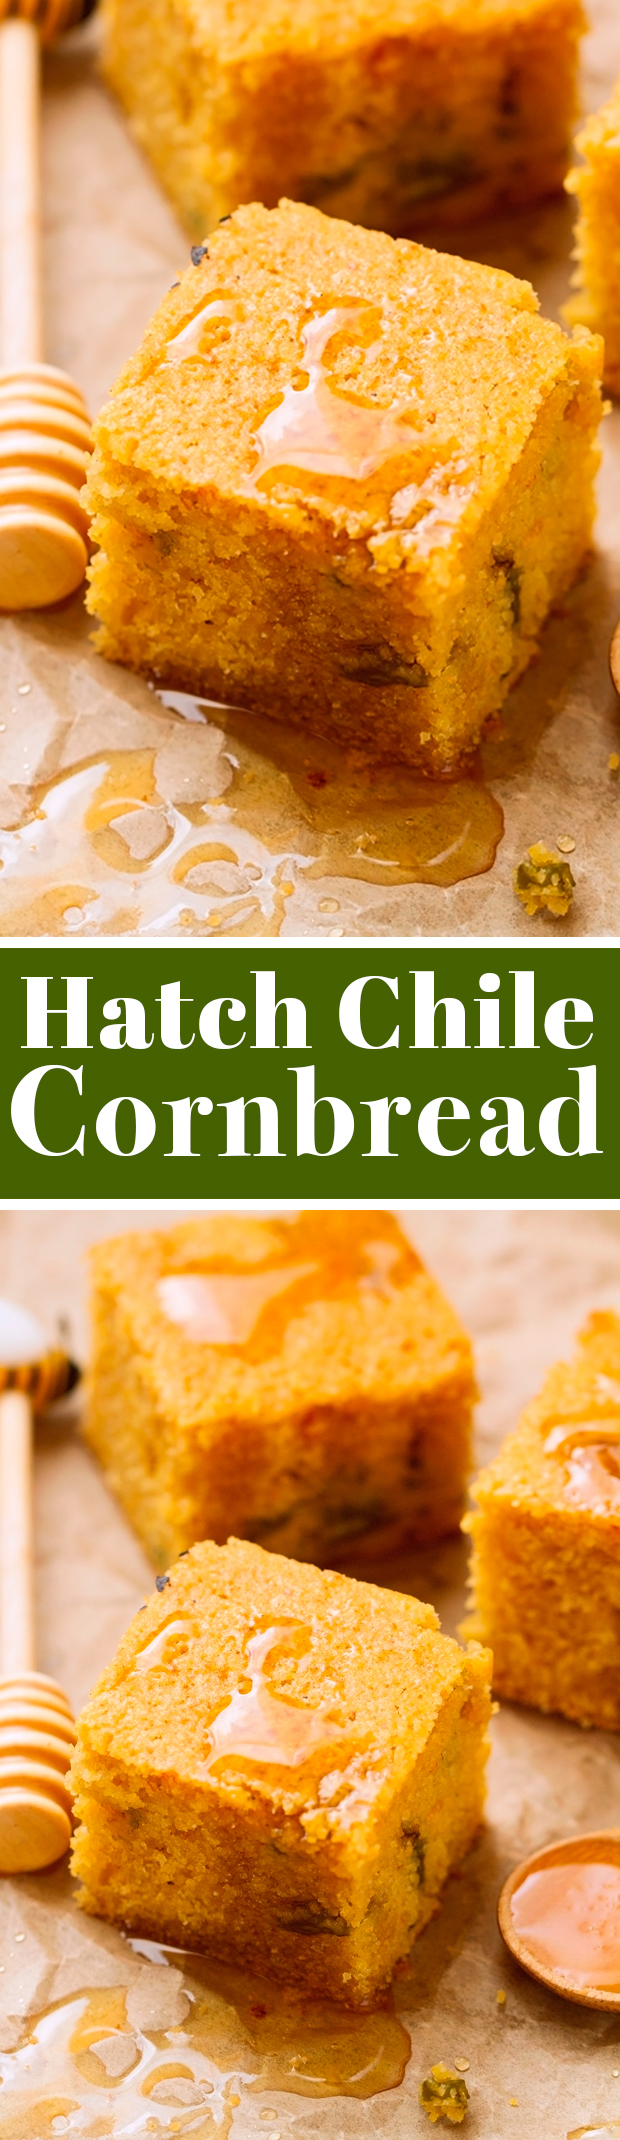 Hatch Chile Cornbread - speckled with hatch peppers but with a sweet savory feel. You're gonna be addicted! #cornbread #hatchchile #hatchchilecornbread | Littlespicejar.com @littlespicejar